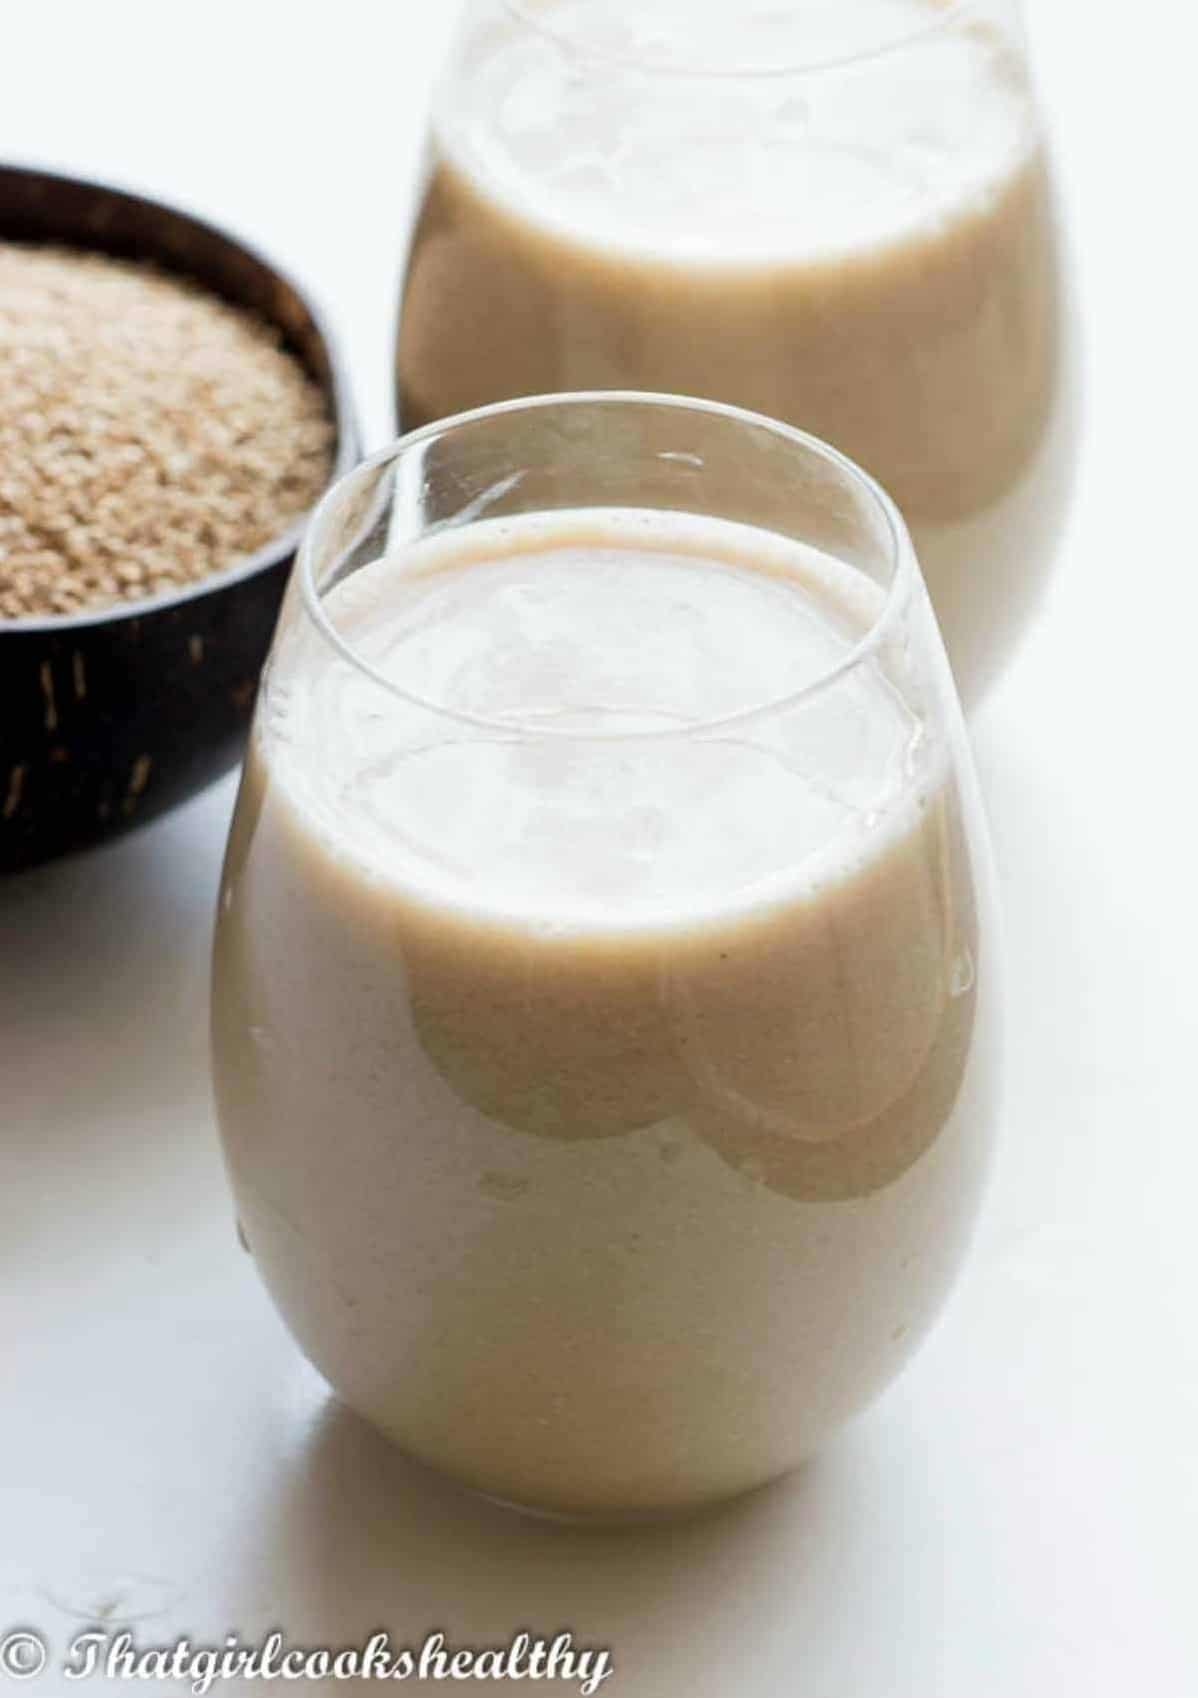  Quinoa milk: the perfect dairy-free alternative for your coffee and smoothies.